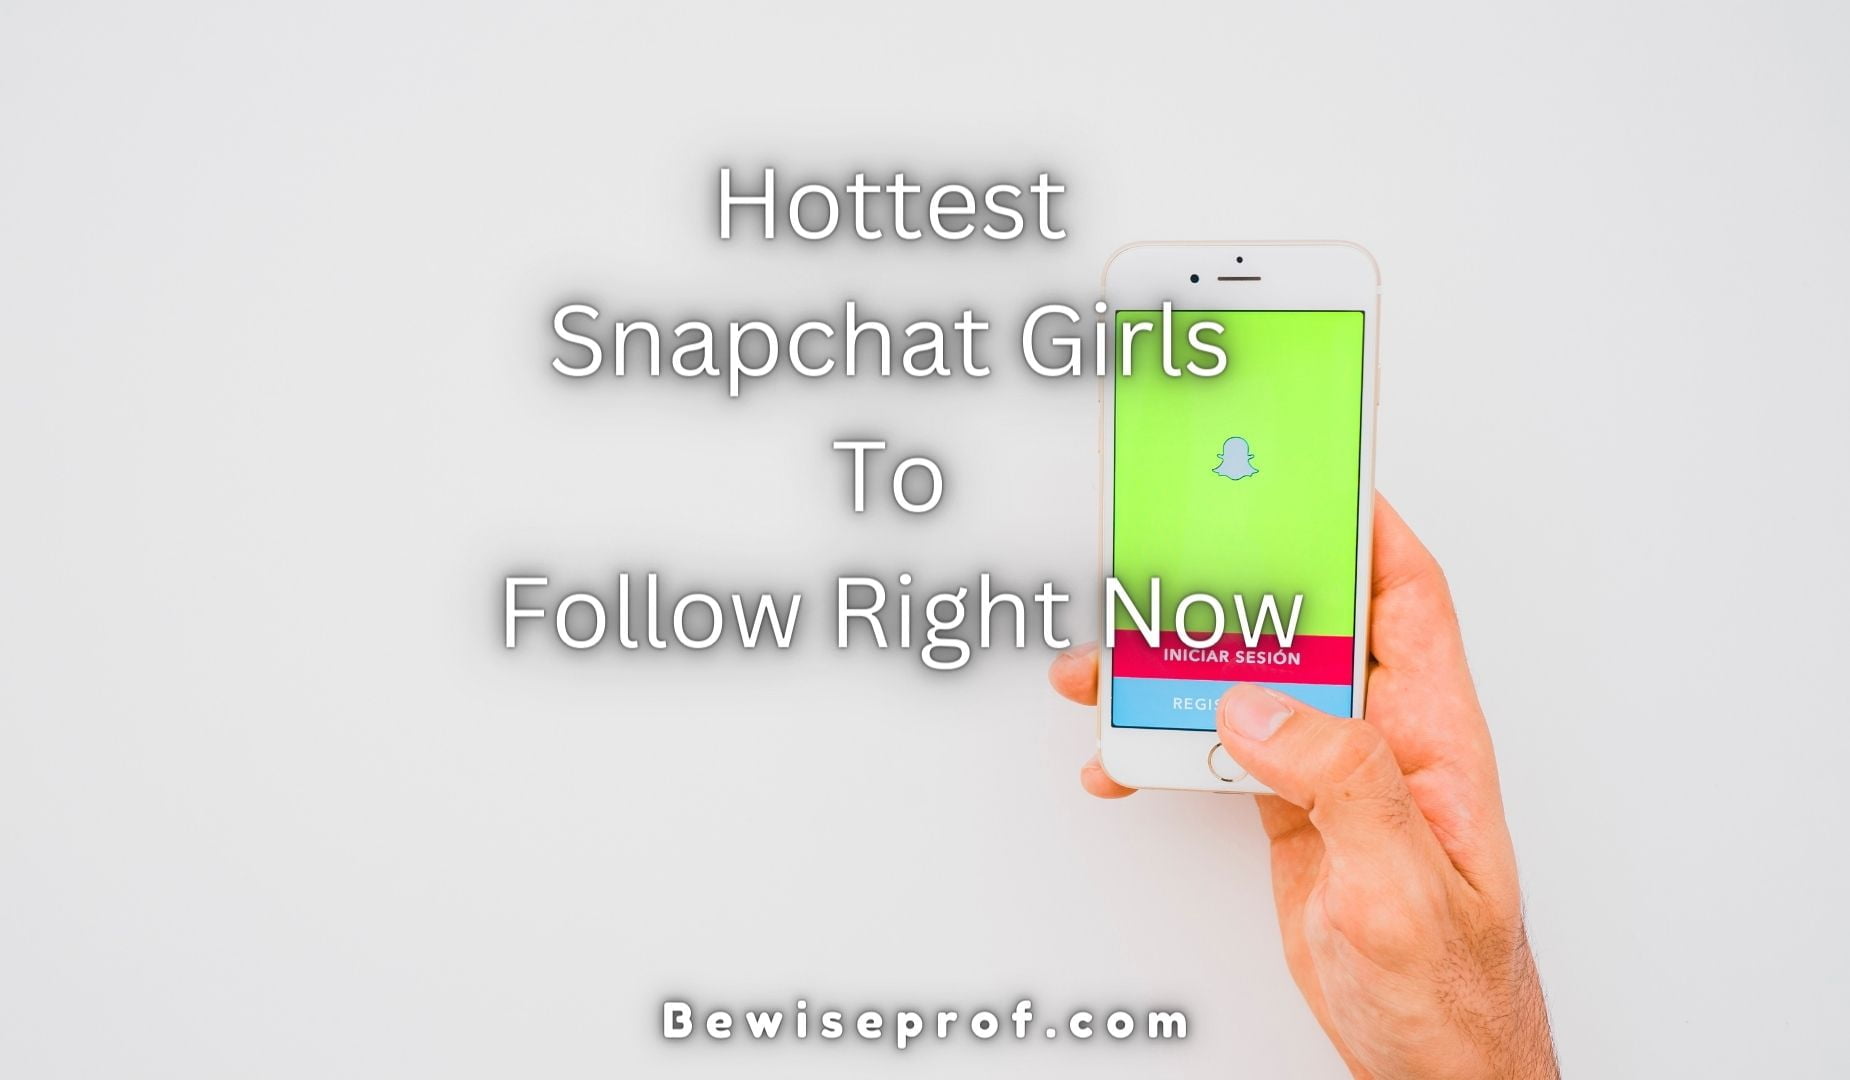 Hottest Snapchat Girls To Follow Right Now